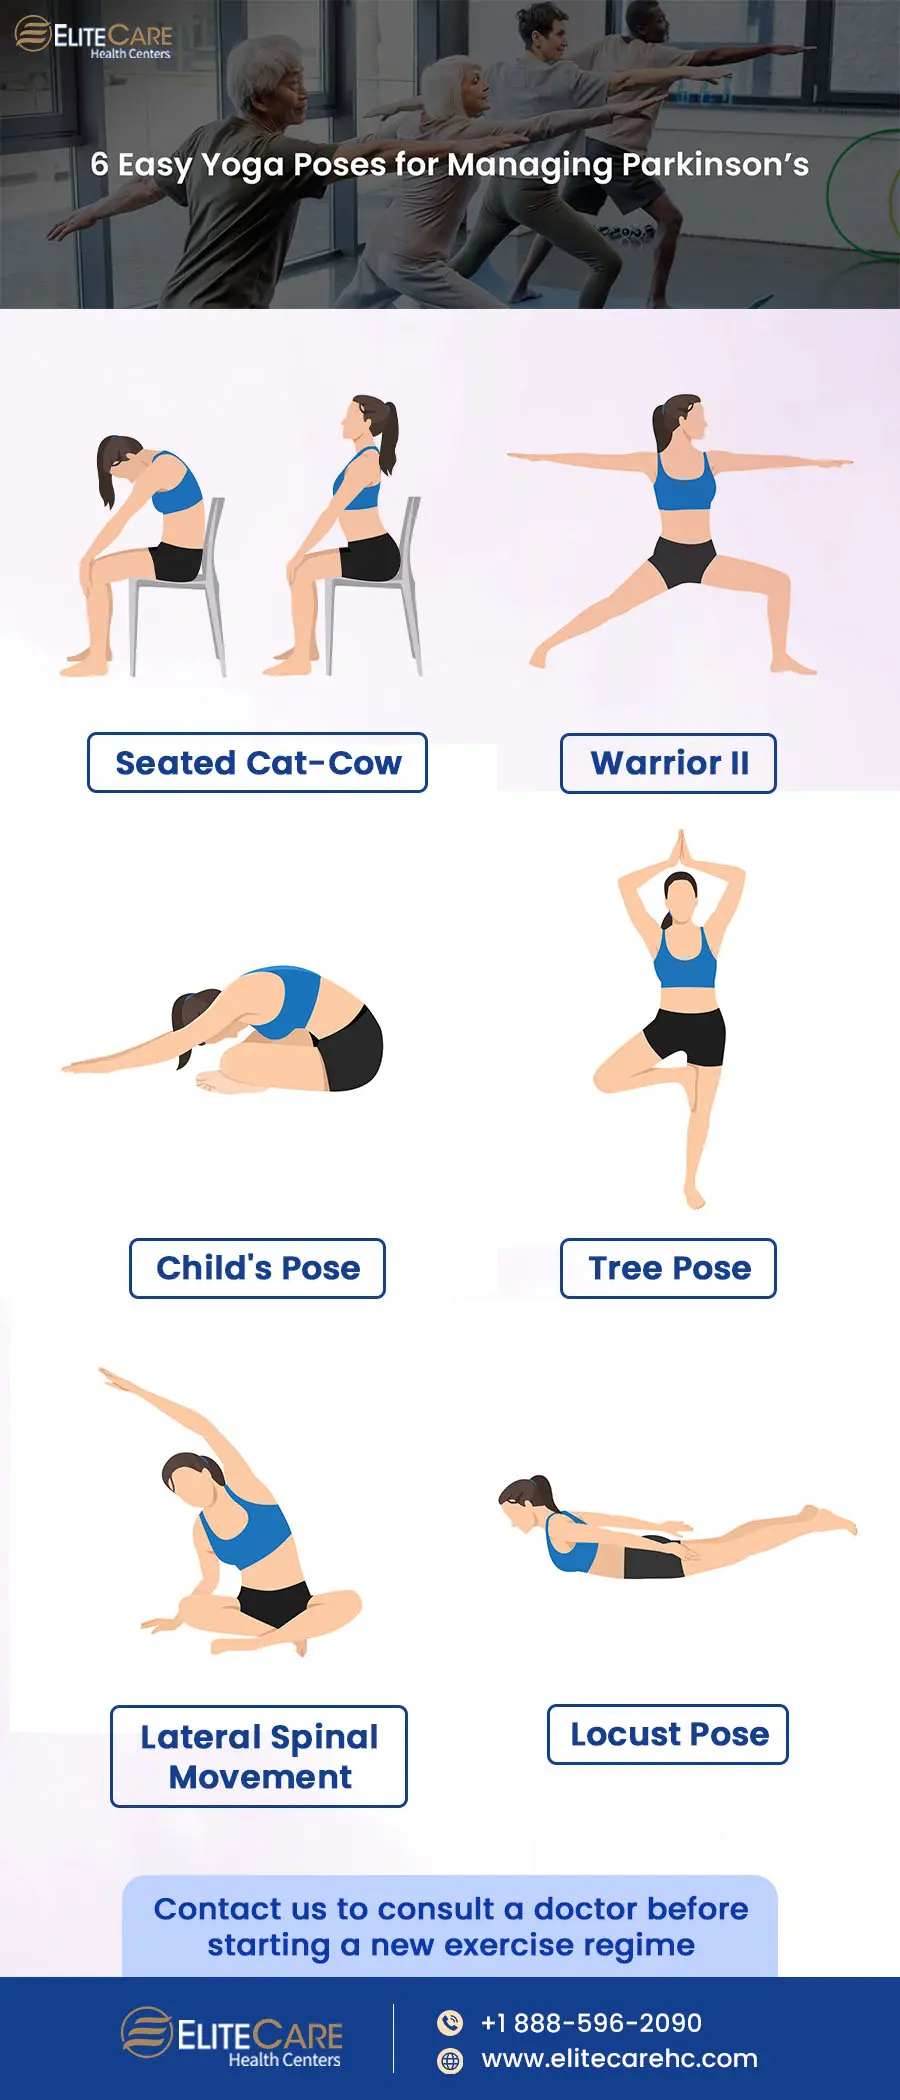 Yoga poses for two people: Easy routine for you and a partner